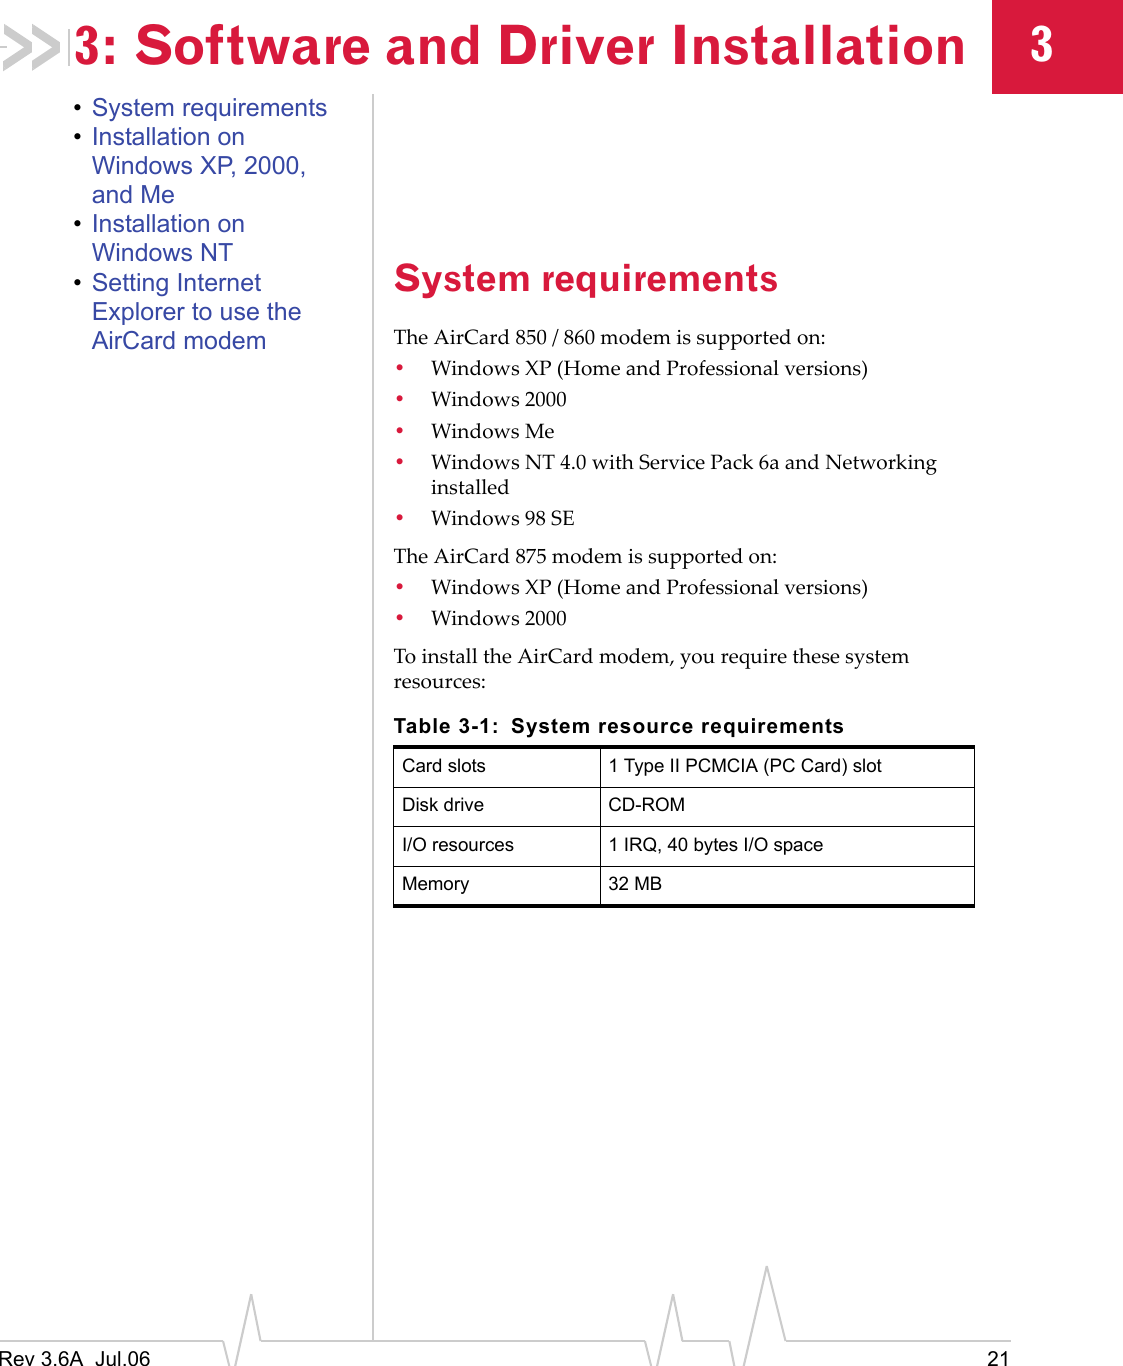 Rev 3.6A  Jul.06 2133: Software and Driver Installation•System requirements•Installation on Windows XP, 2000, and Me•Installation on Windows NT•Setting Internet Explorer to use the AirCard modemSystem requirementsThe AirCard 850 / 860 modem is supported on:•Windows XP (Home and Professional versions)•Windows 2000•Windows Me•Windows NT 4.0 with Service Pack 6a and Networking installed•Windows 98 SEThe AirCard 875 modem is supported on:•Windows XP (Home and Professional versions)•Windows 2000To install the AirCard modem, you require these system resources:Table 3-1: System resource requirementsCard slots 1 Type II PCMCIA (PC Card) slotDisk drive CD-ROMI/O resources 1 IRQ, 40 bytes I/O spaceMemory 32 MB